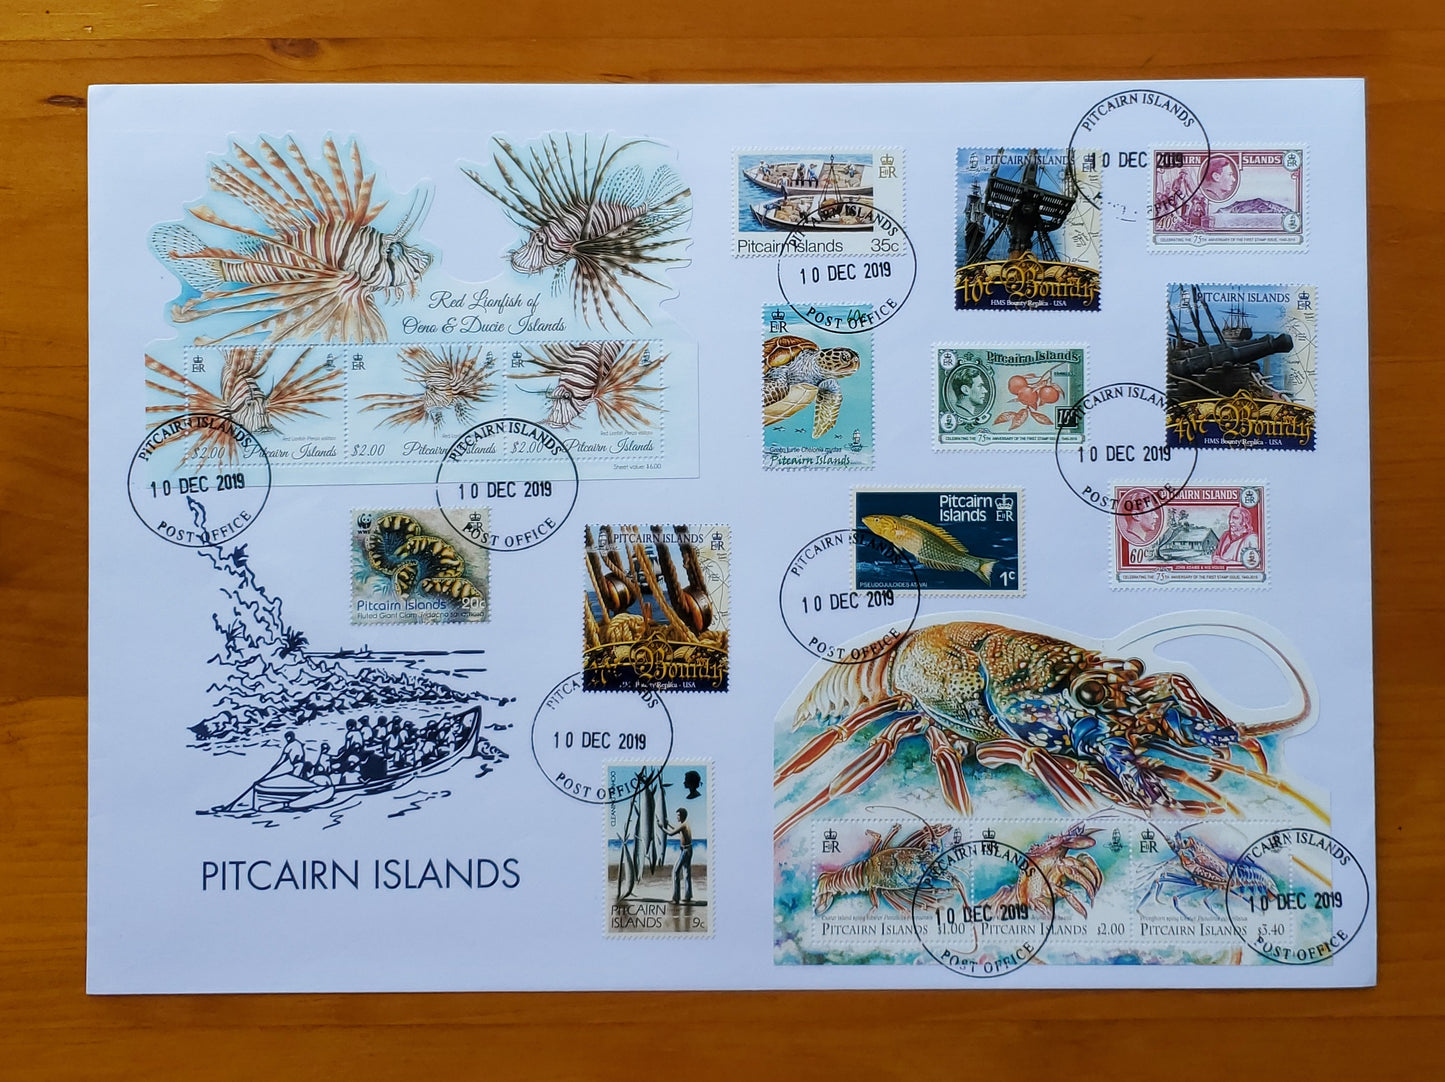 Pitcairn Islands Marine Reserve Stamp Issues  - Crayfish and Lionfish